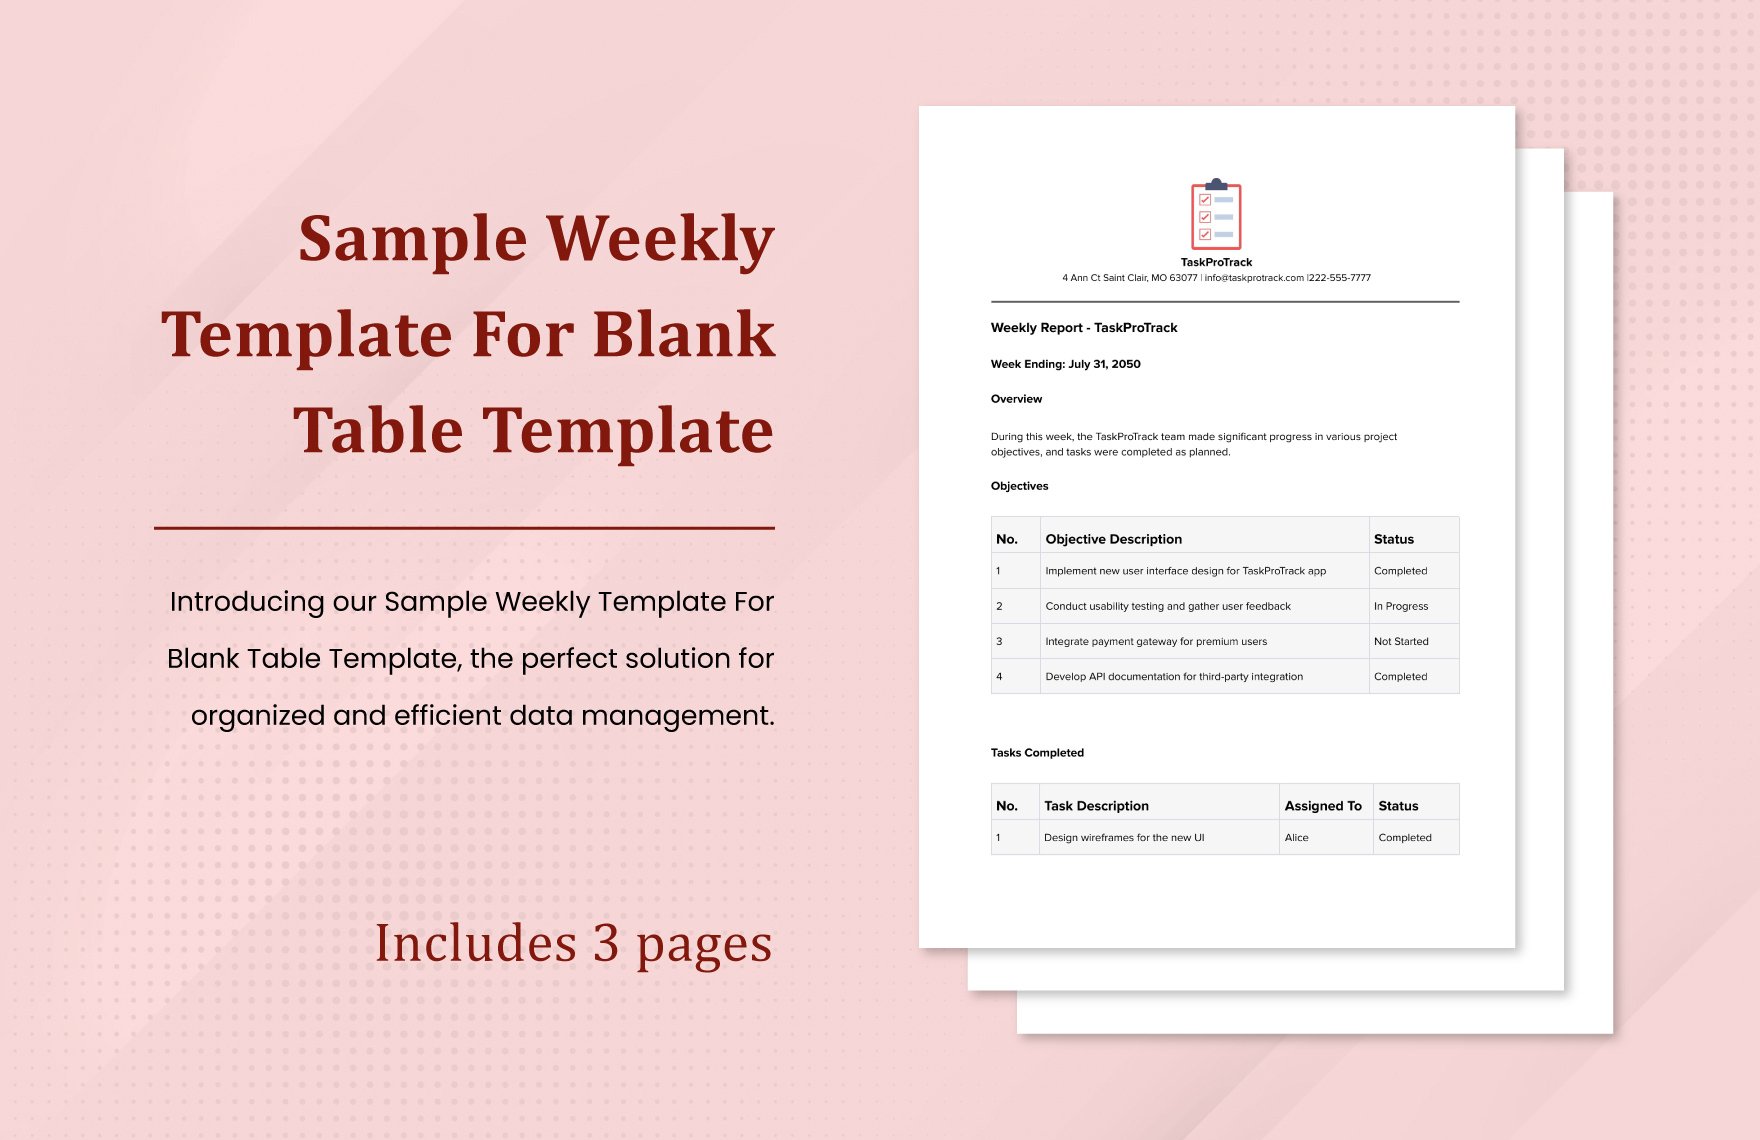 Sample Weekly Template For Blank Table Template